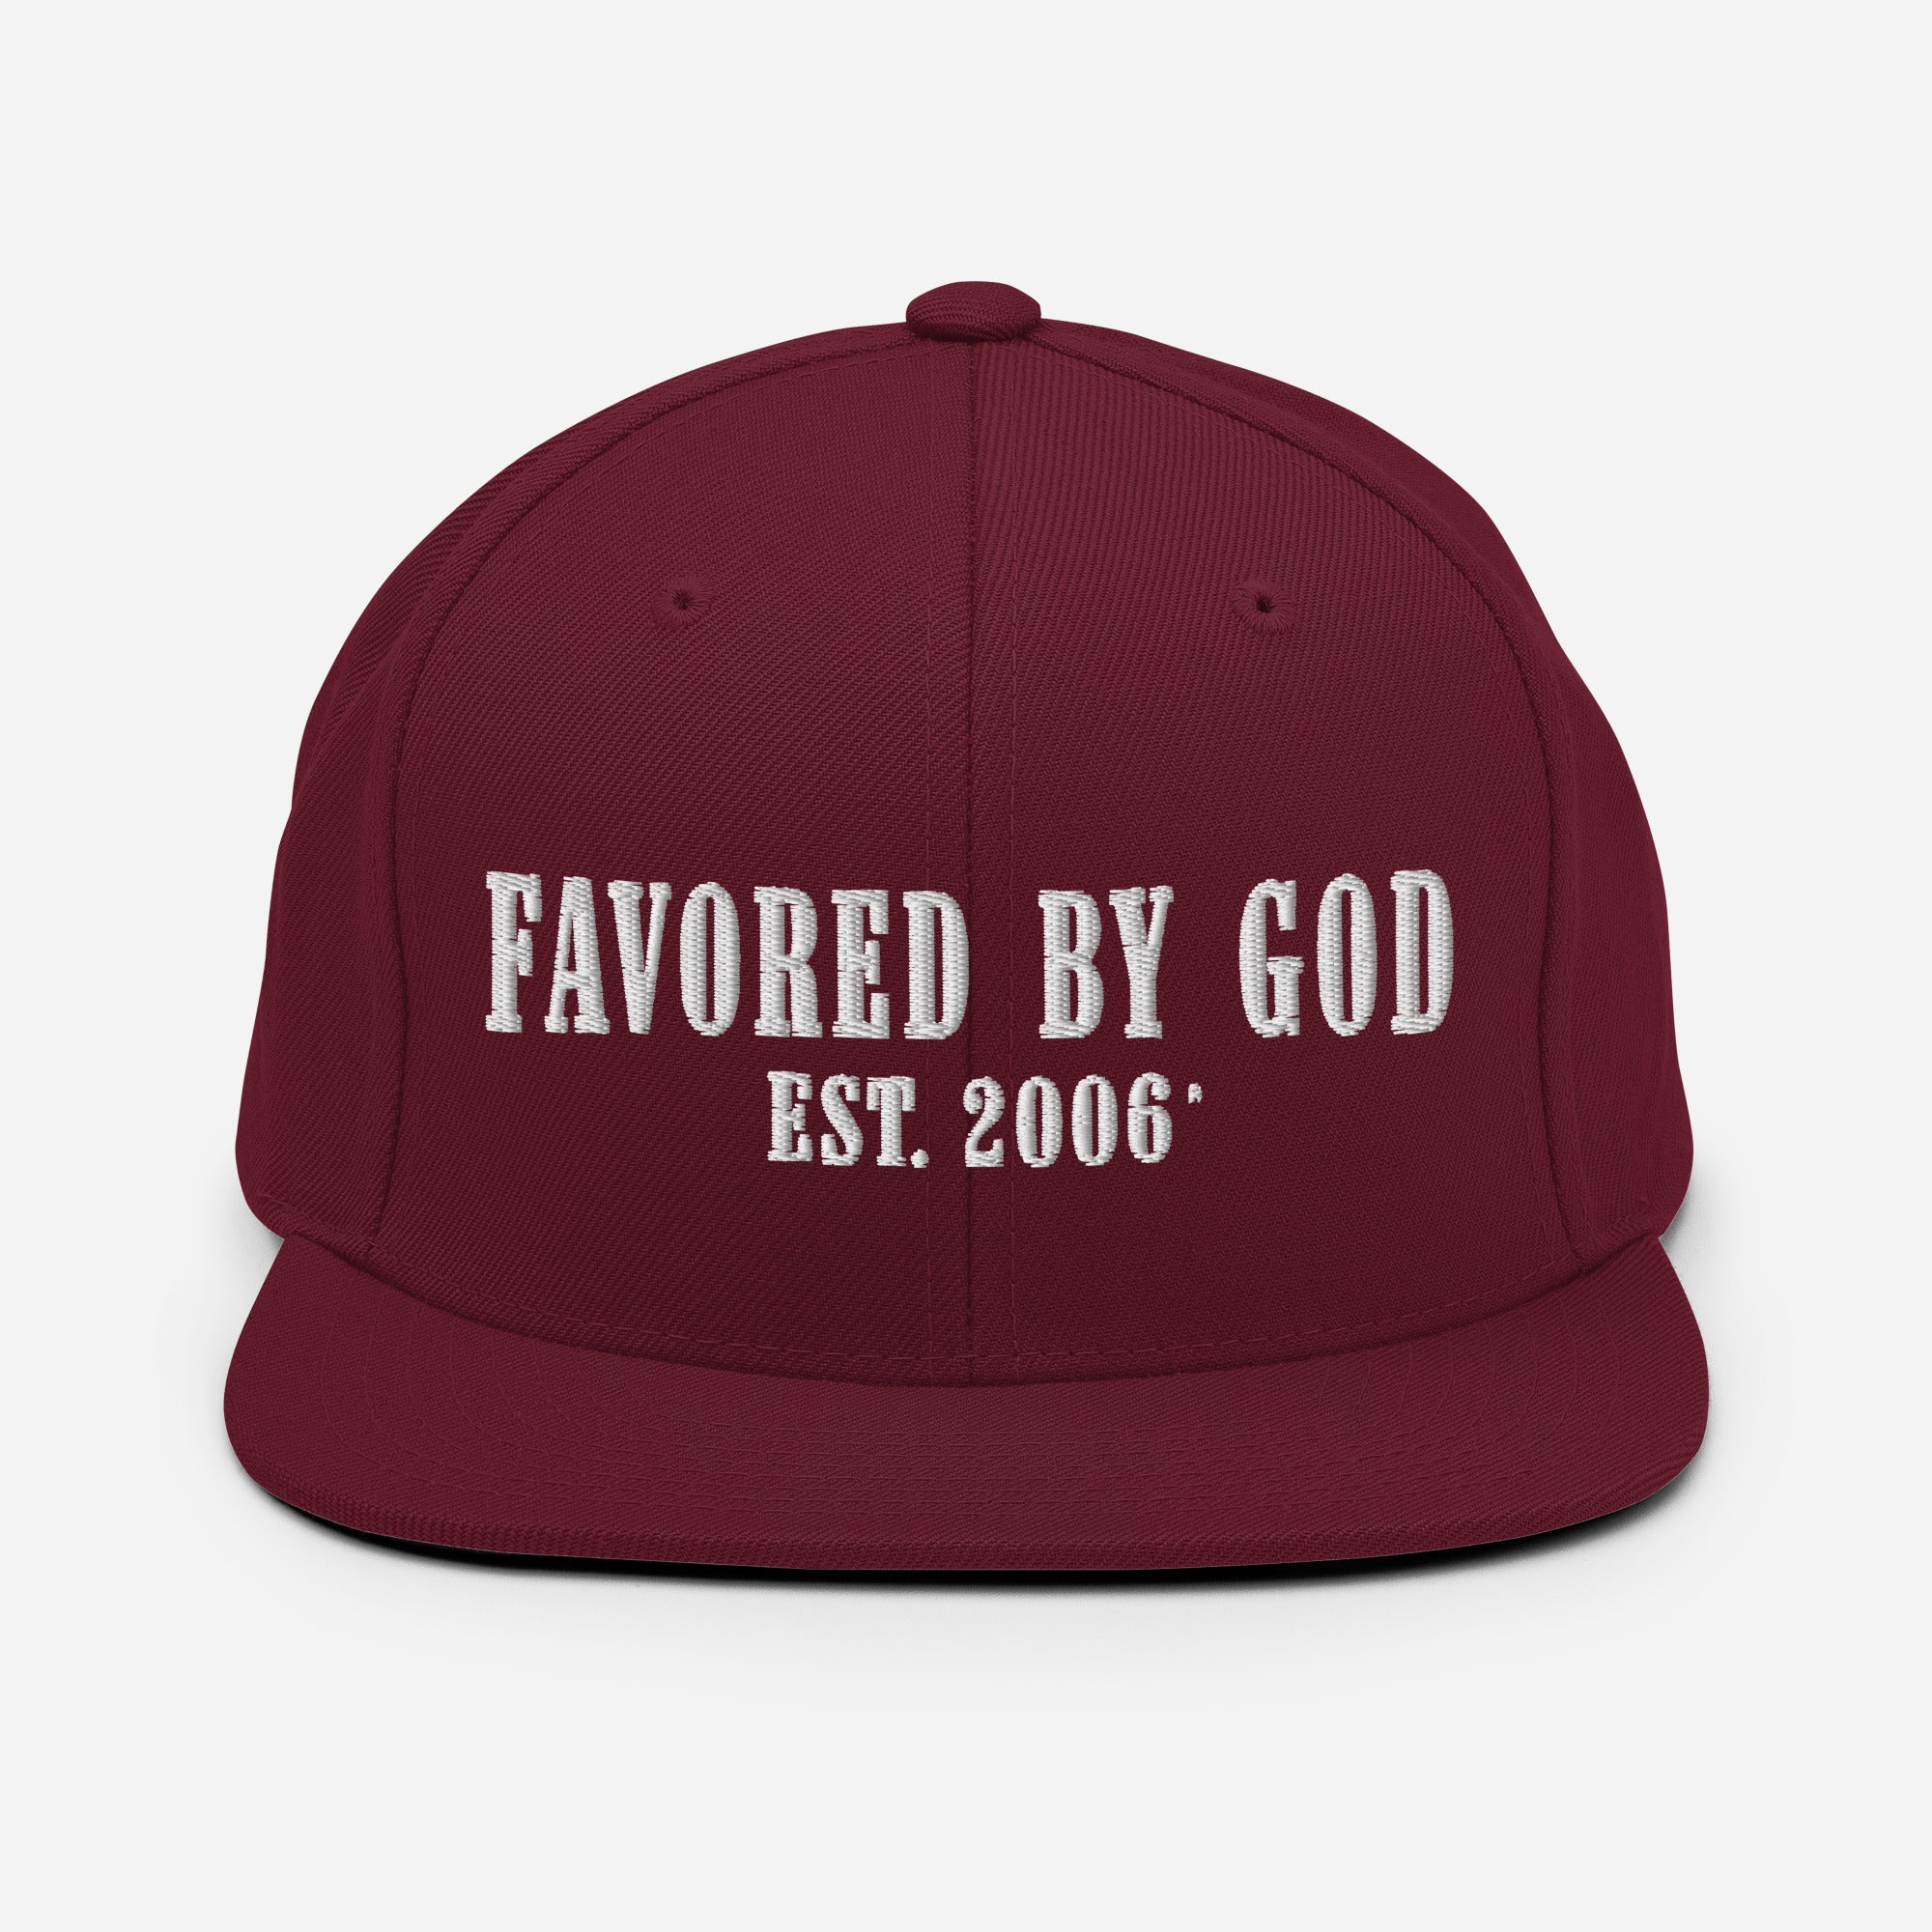 Favored By God Est. 2006 Snapback Hat, Used By God, Used By God Clothing, Christian Apparel, Christian Hats, Christian T-Shirts, Christian Clothing, God Shirts, Christian Sweatshirts, God Clothing, Jesus Hoodie, Jesus Clothes, God Is Dope, Art Of Homage, Red Letter Clothing, Elevated Faith, Active Faith Sports, Beacon Threads, God The Father Apparel